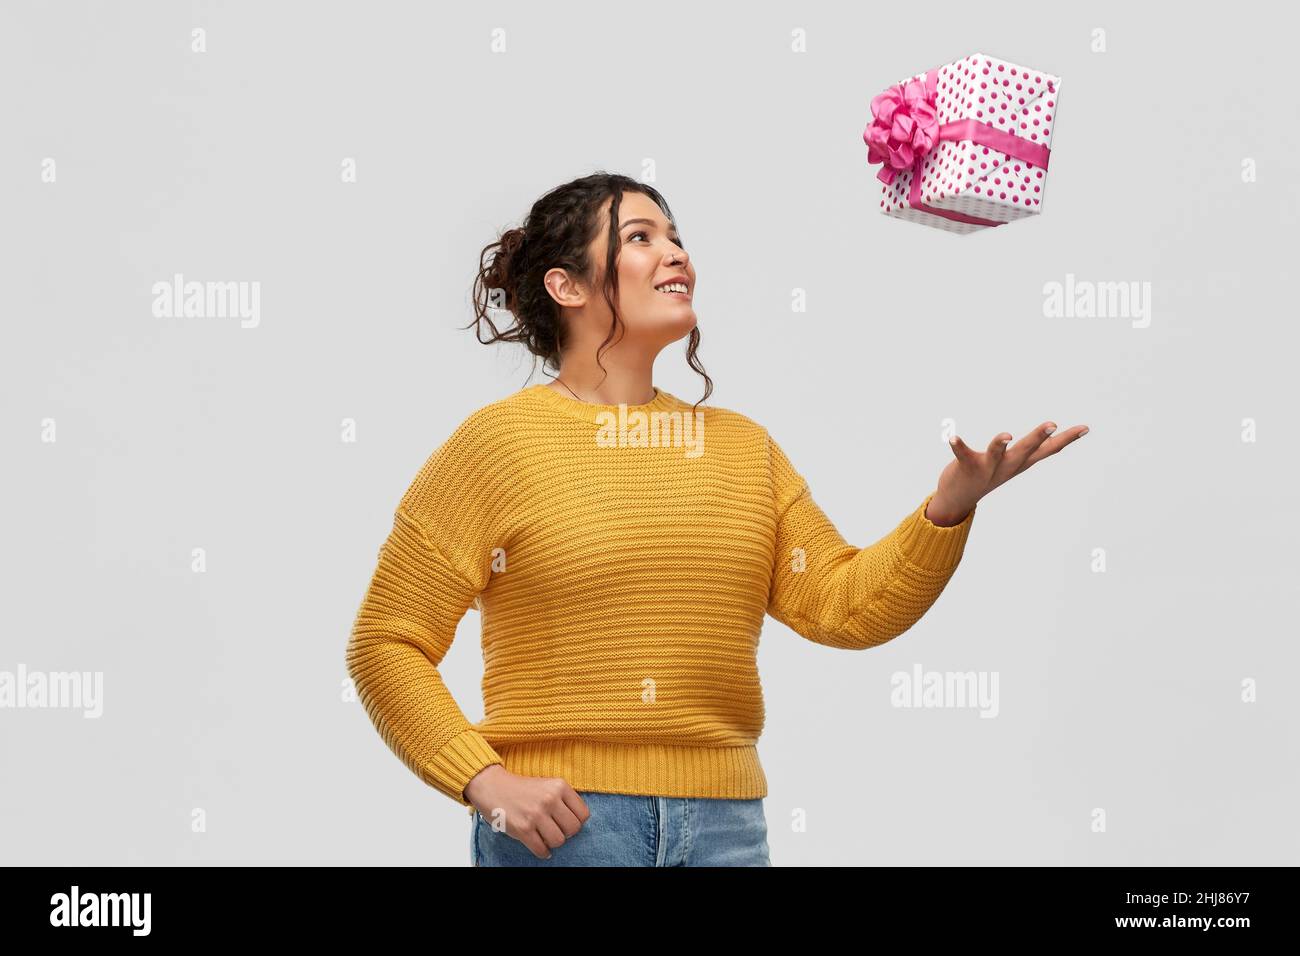 smiling young woman throwing gift box Stock Photo